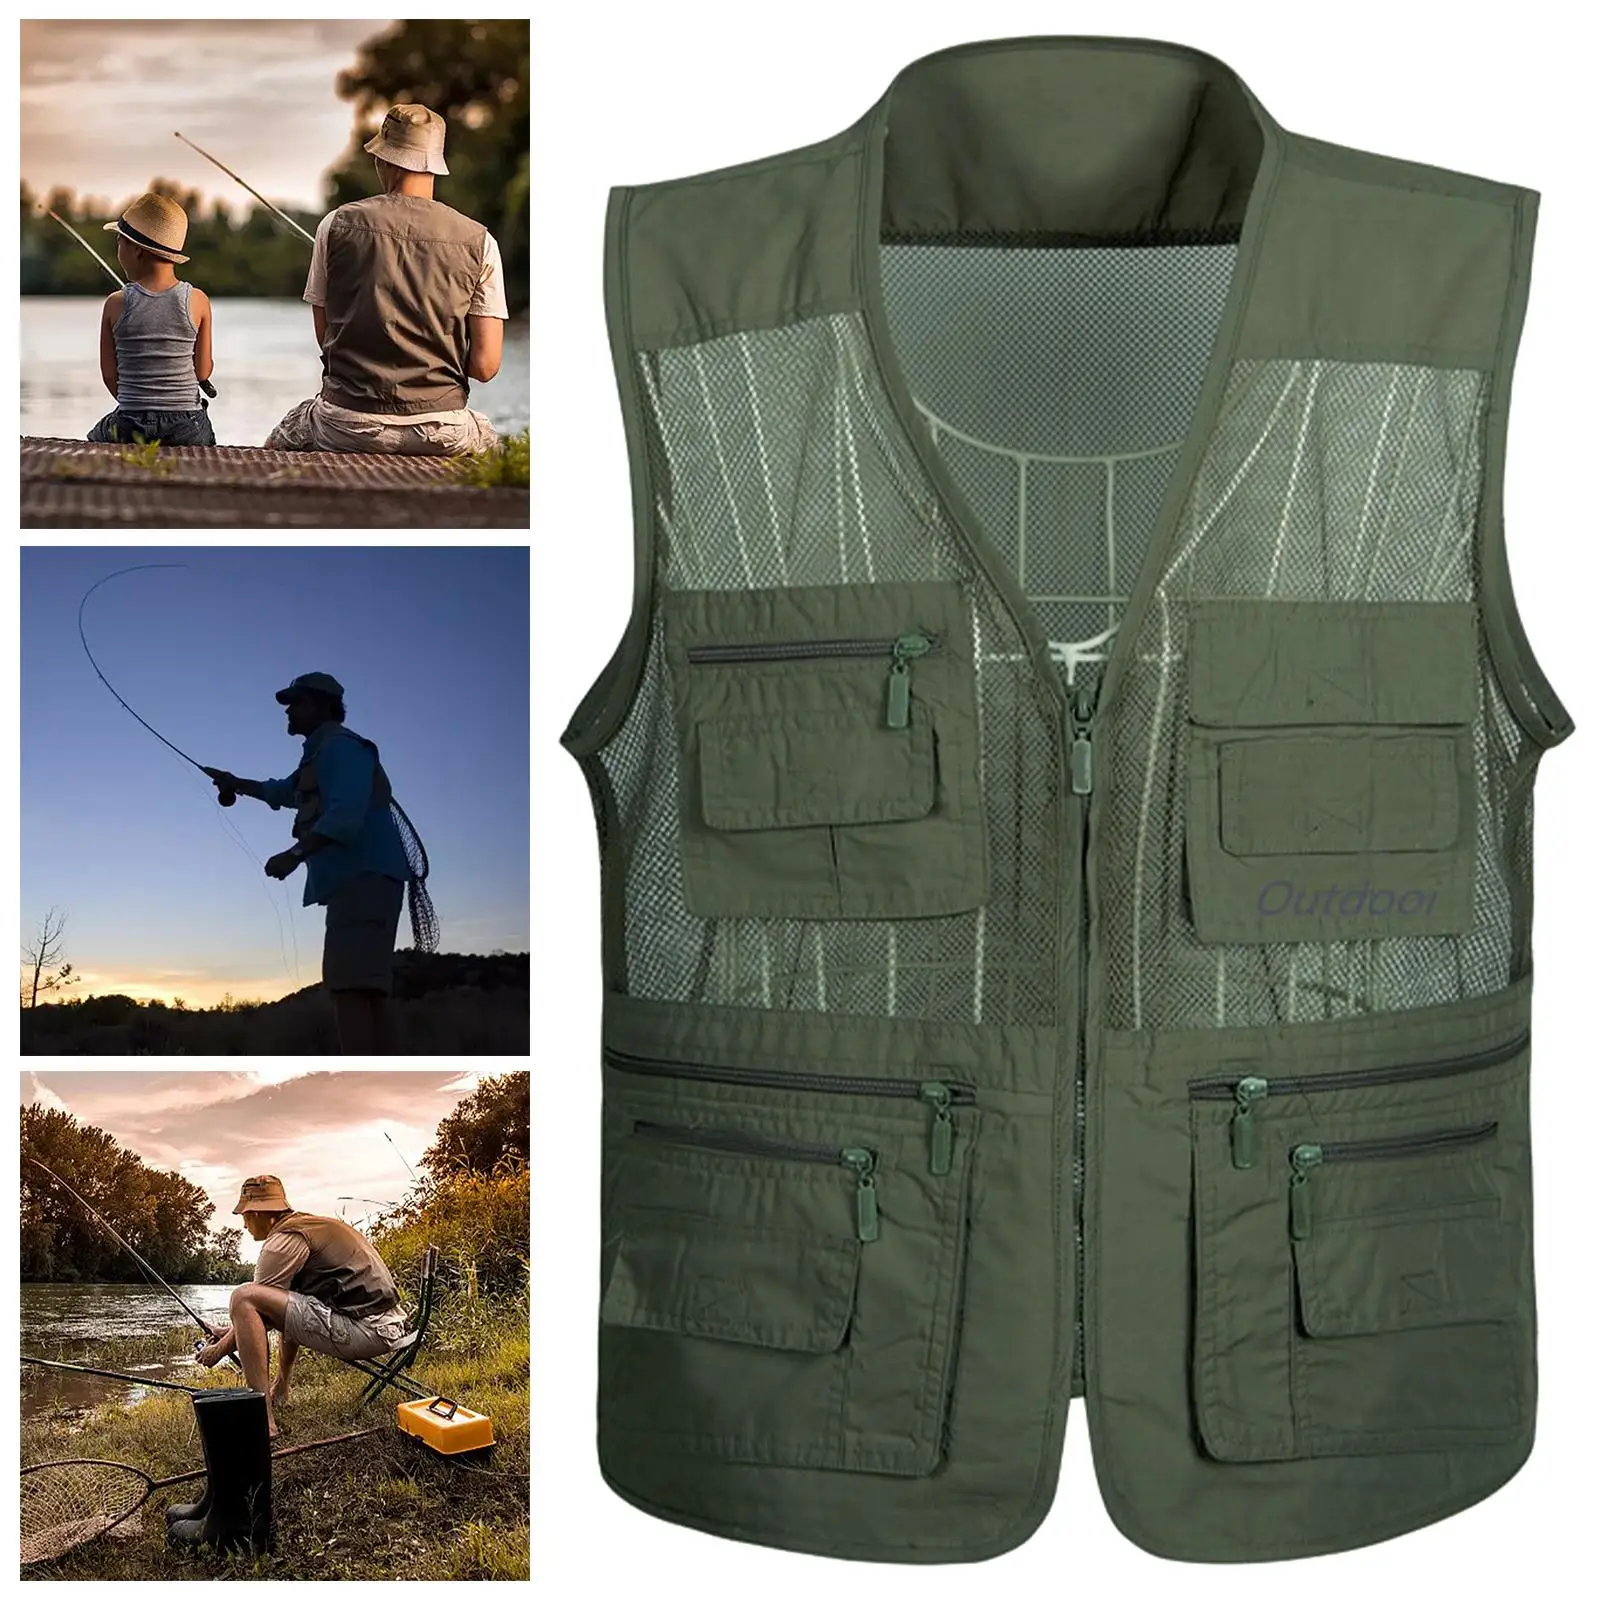 Unisex Fishing Mesh Vest Quick Dry Comfortable with Multi Pockets Fishing Waistcoat Sleeveless Jacket for Camping Hunting Adults